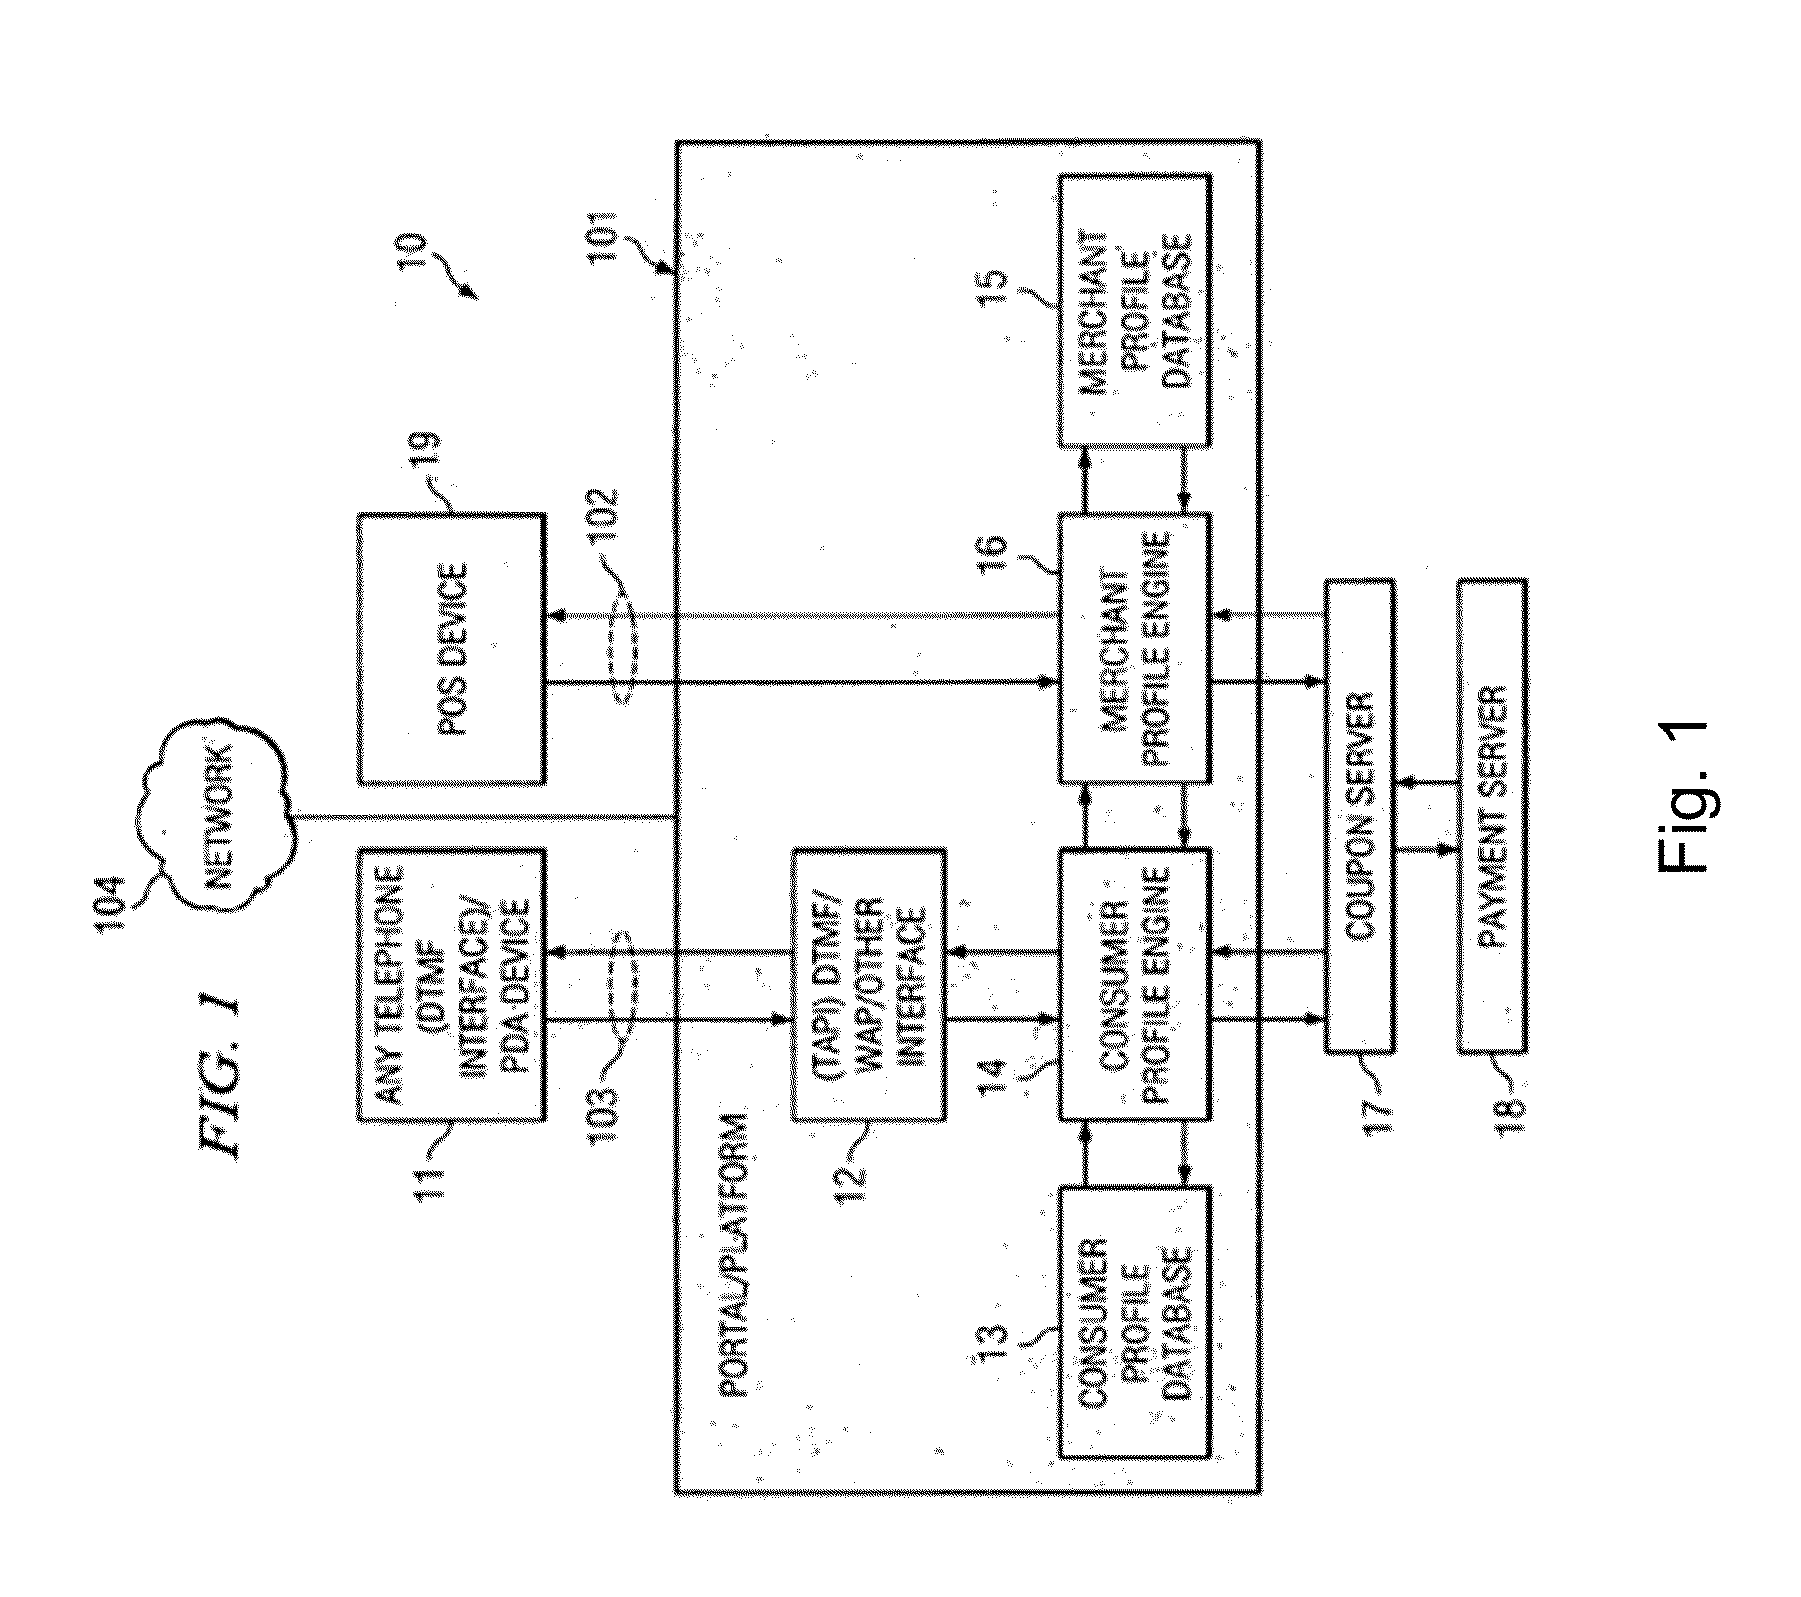 System and method of a media delivery services platform for targeting consumers in real time